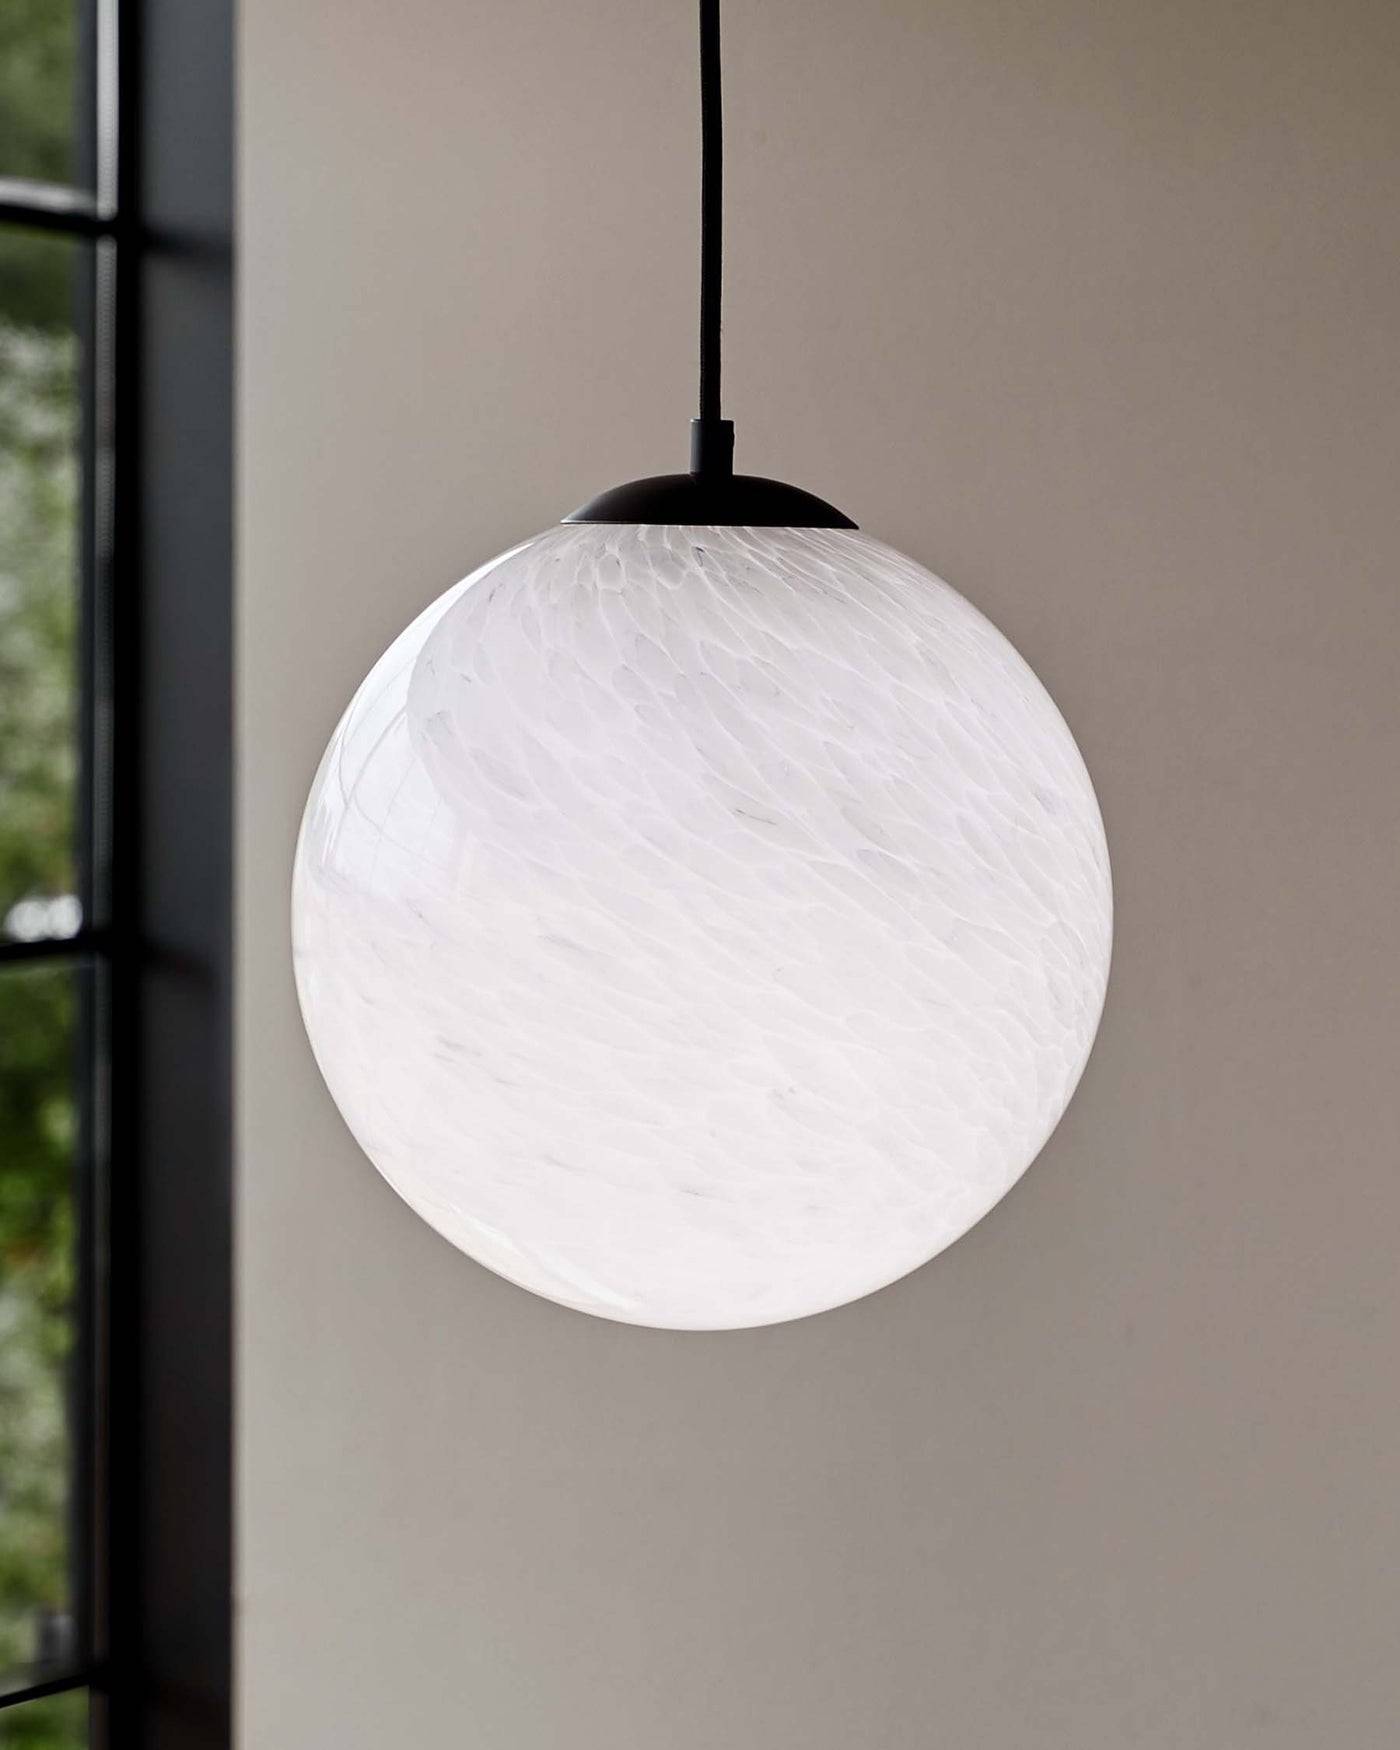 A modern spherical pendant light with a textured white glass shade and a matte black canopy, suspended from a simple black cord against a neutral background.